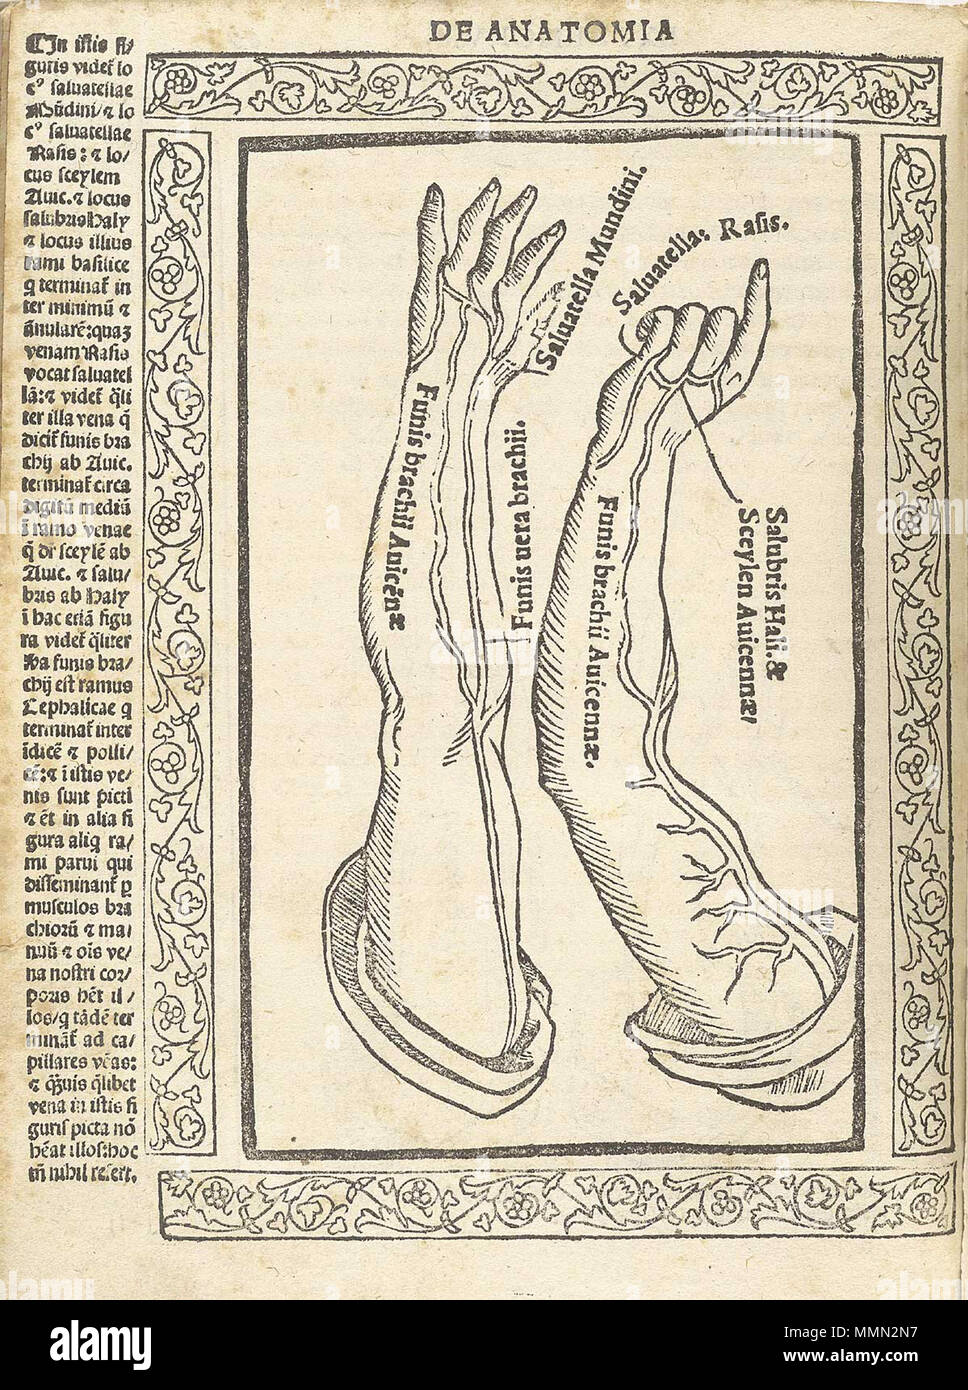 . English: Berengario da Carpi, Jacopo. Isagogae breues, perlucidae ac uberrimae, in anatomiam humani corporis a communi medicorum academia usitatam. (Bologna: Beneditcus Hector, 1523). Jacopo Berengario da Carpi, also known as Jacobus Berengarius Carpensis, Jacopo Barigazzi, or simply Carpus, was born in Carpi, Modena in about 1460, the son of a surgeon. While young, he was a student of the noted printer and editor, Aldus Manutius. He attended medical school in Bologna and later taught surgery at Pavia, and from 1502 to 1527 he was on the faculty at Bologna. At various times, he lived in Ferr Stock Photo